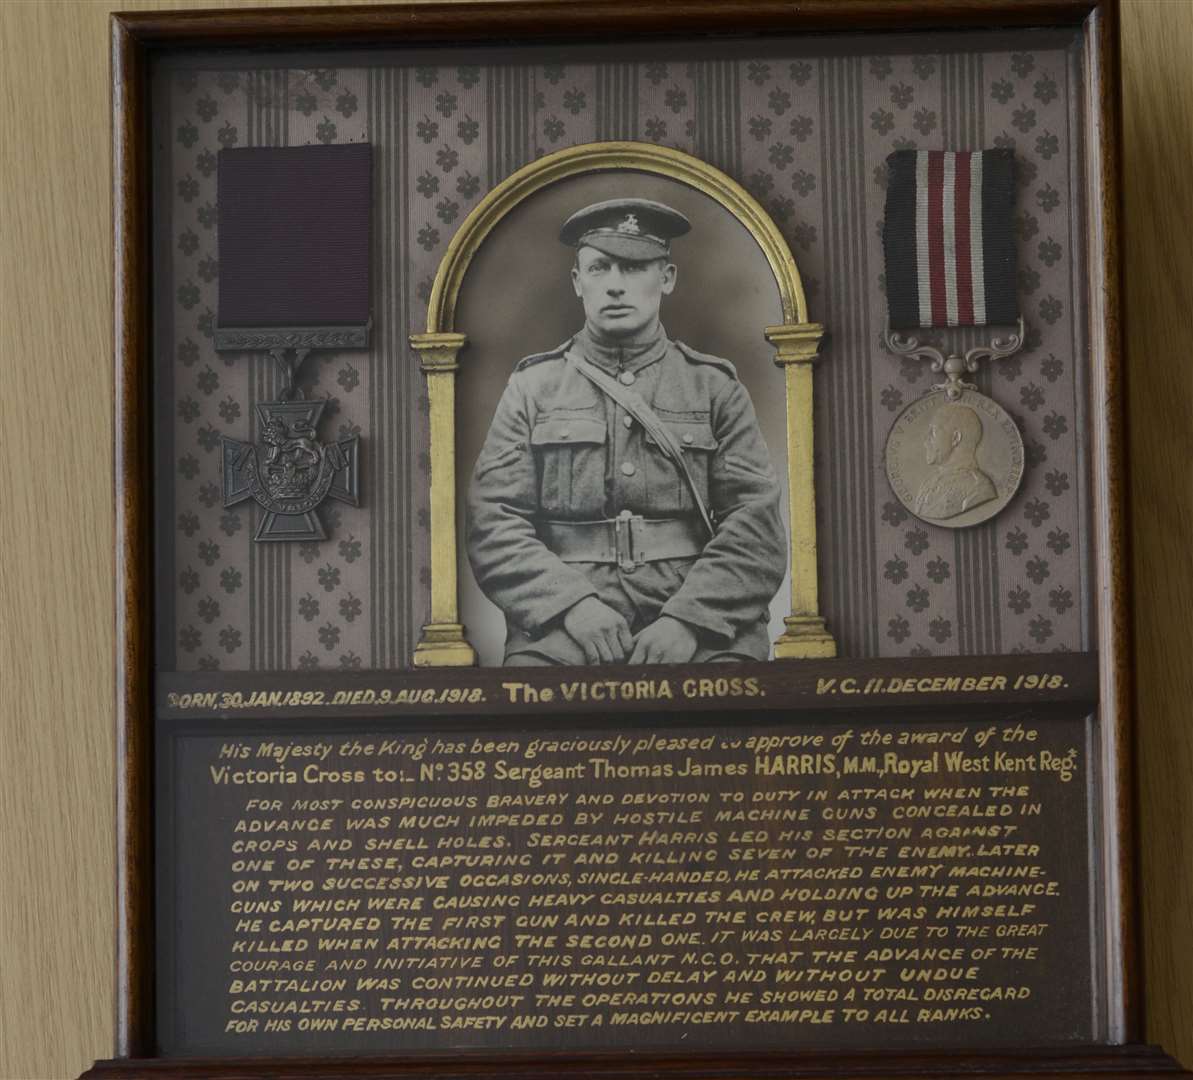 WW1 VC winner Harris and his medals. Supplied by Maidstone Museum